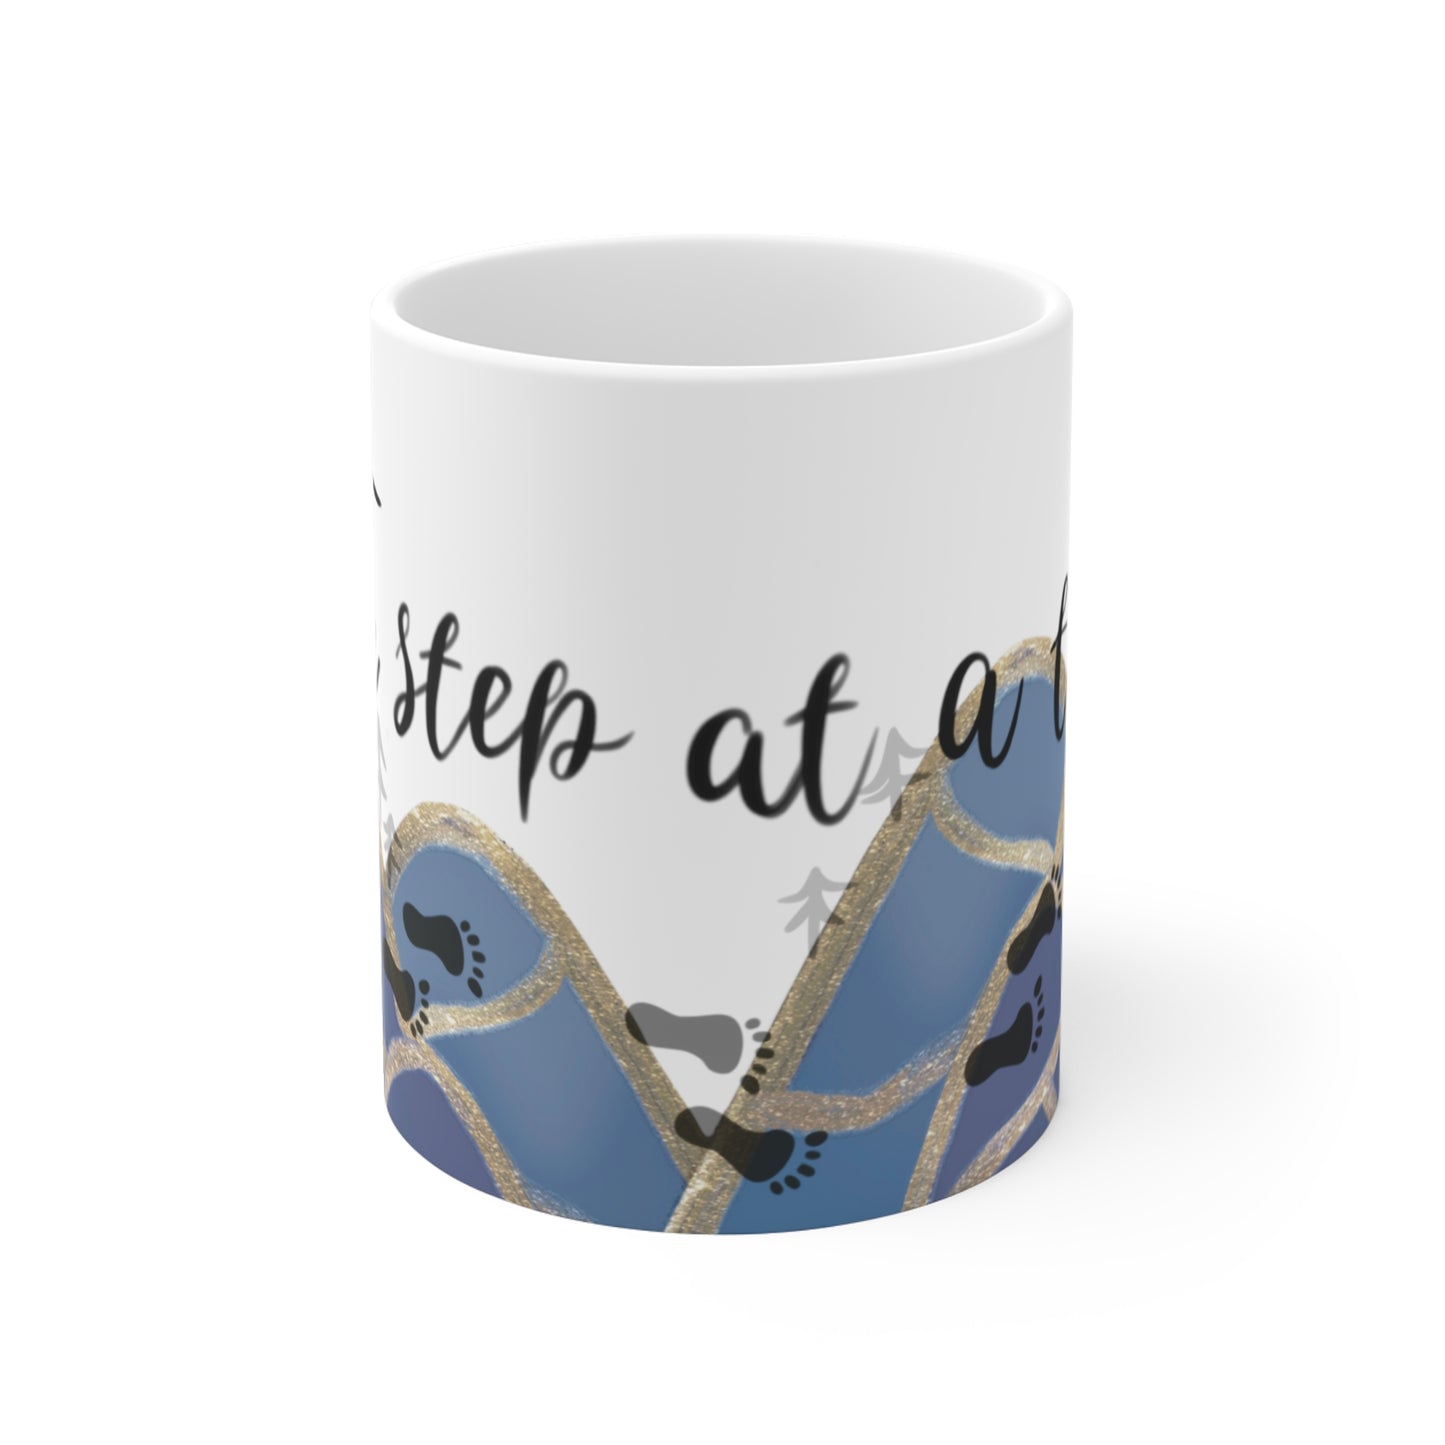 Mountains Landscape Mug: One Step at a Time